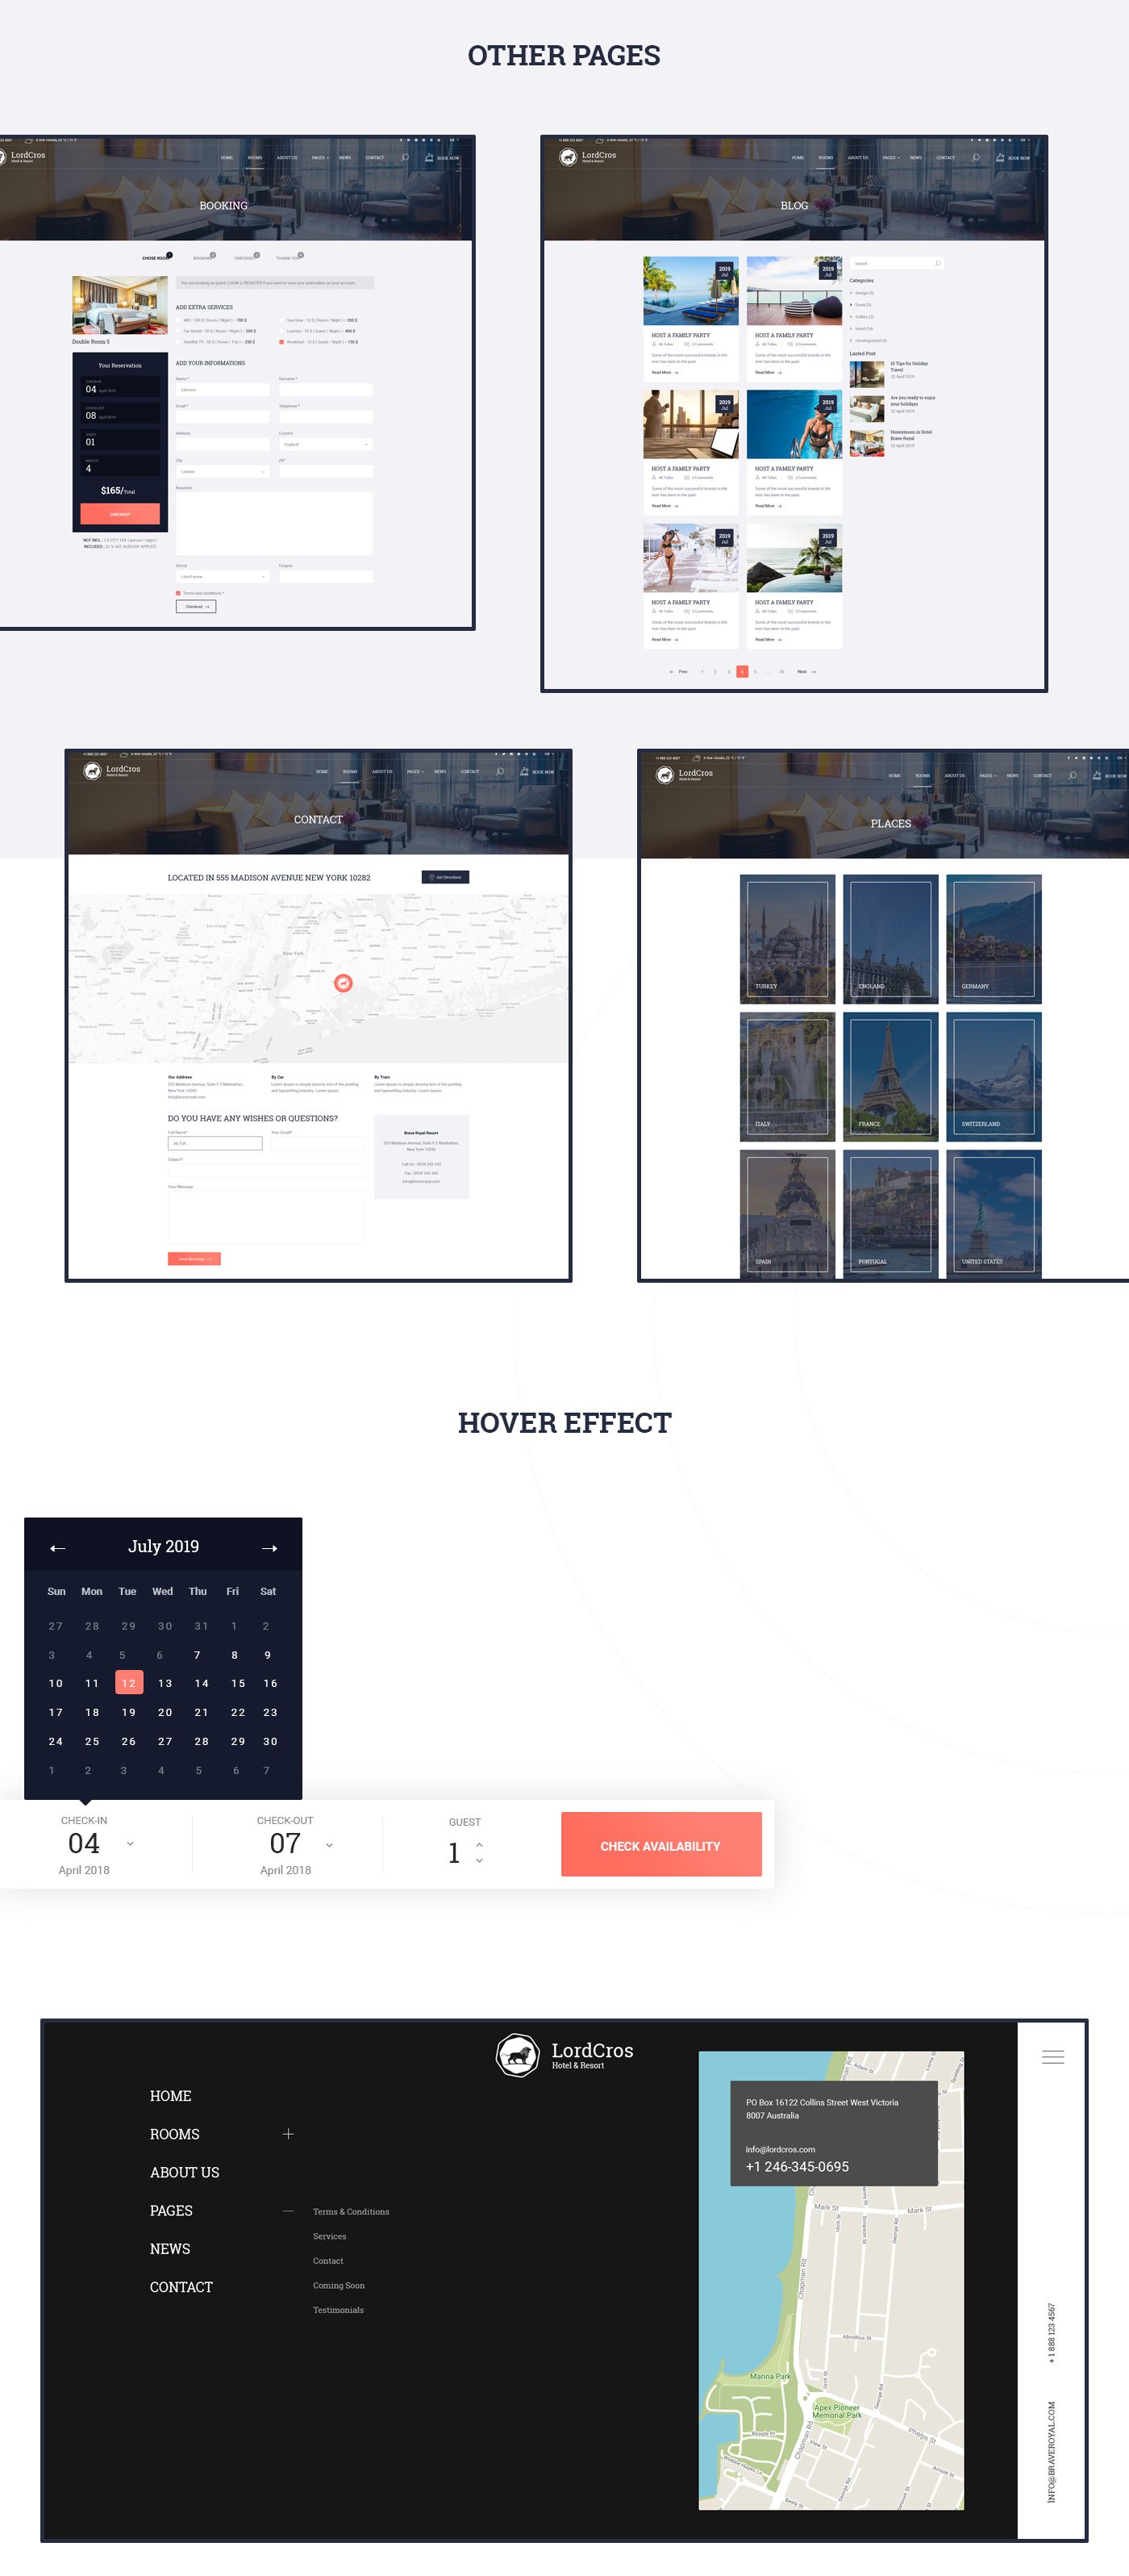 LordCros - Hotel, Resort & Spa PSD Template - 5